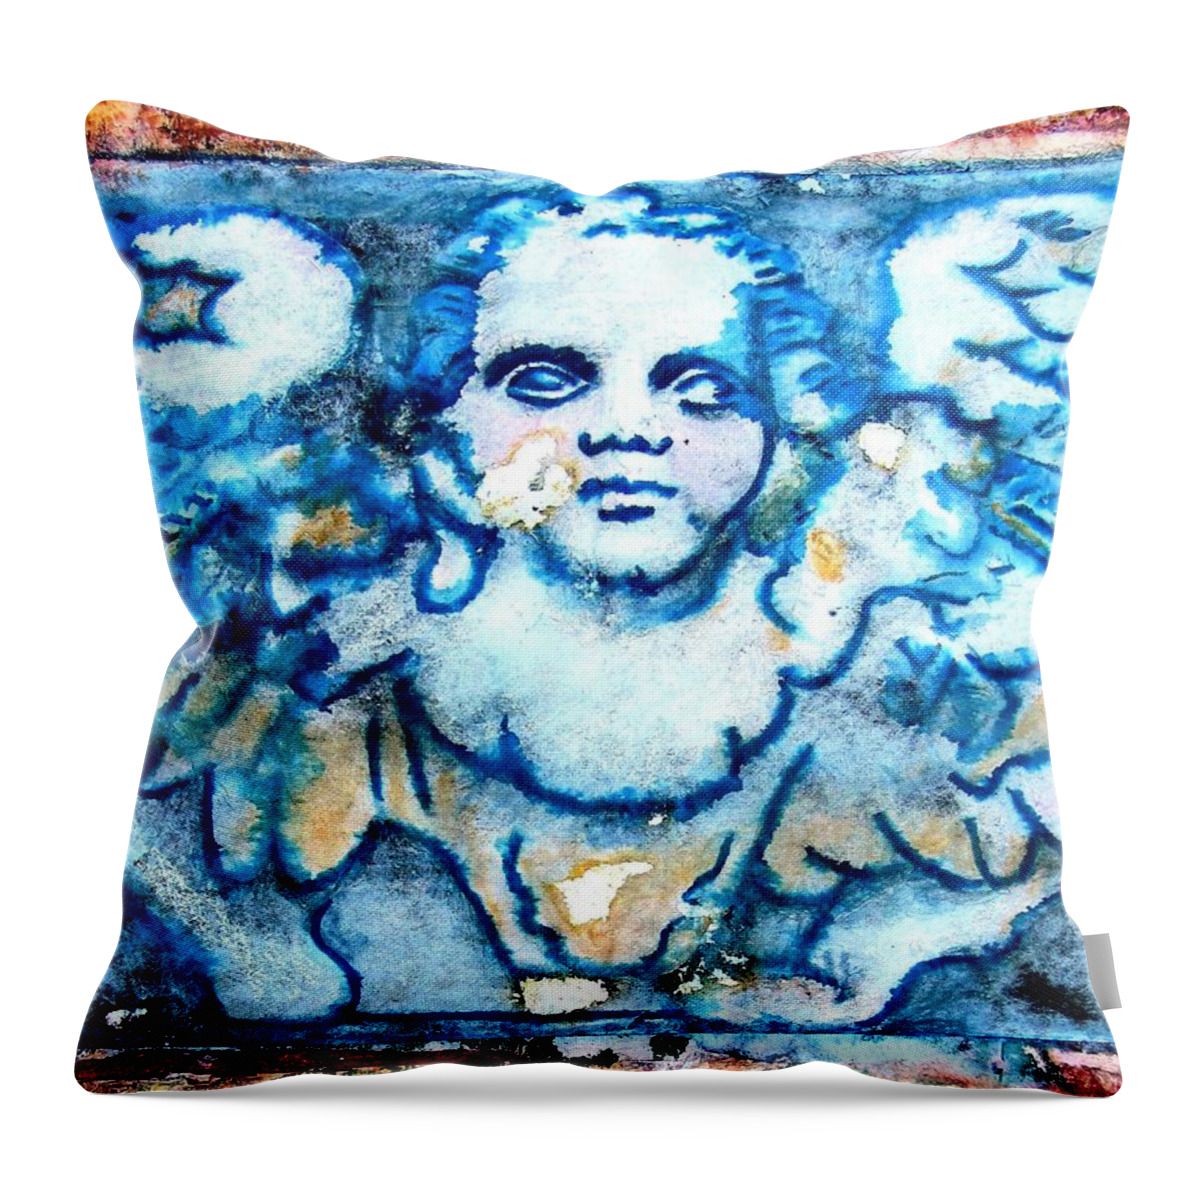 Angels Throw Pillow featuring the mixed media Angel 6 by Maria Huntley